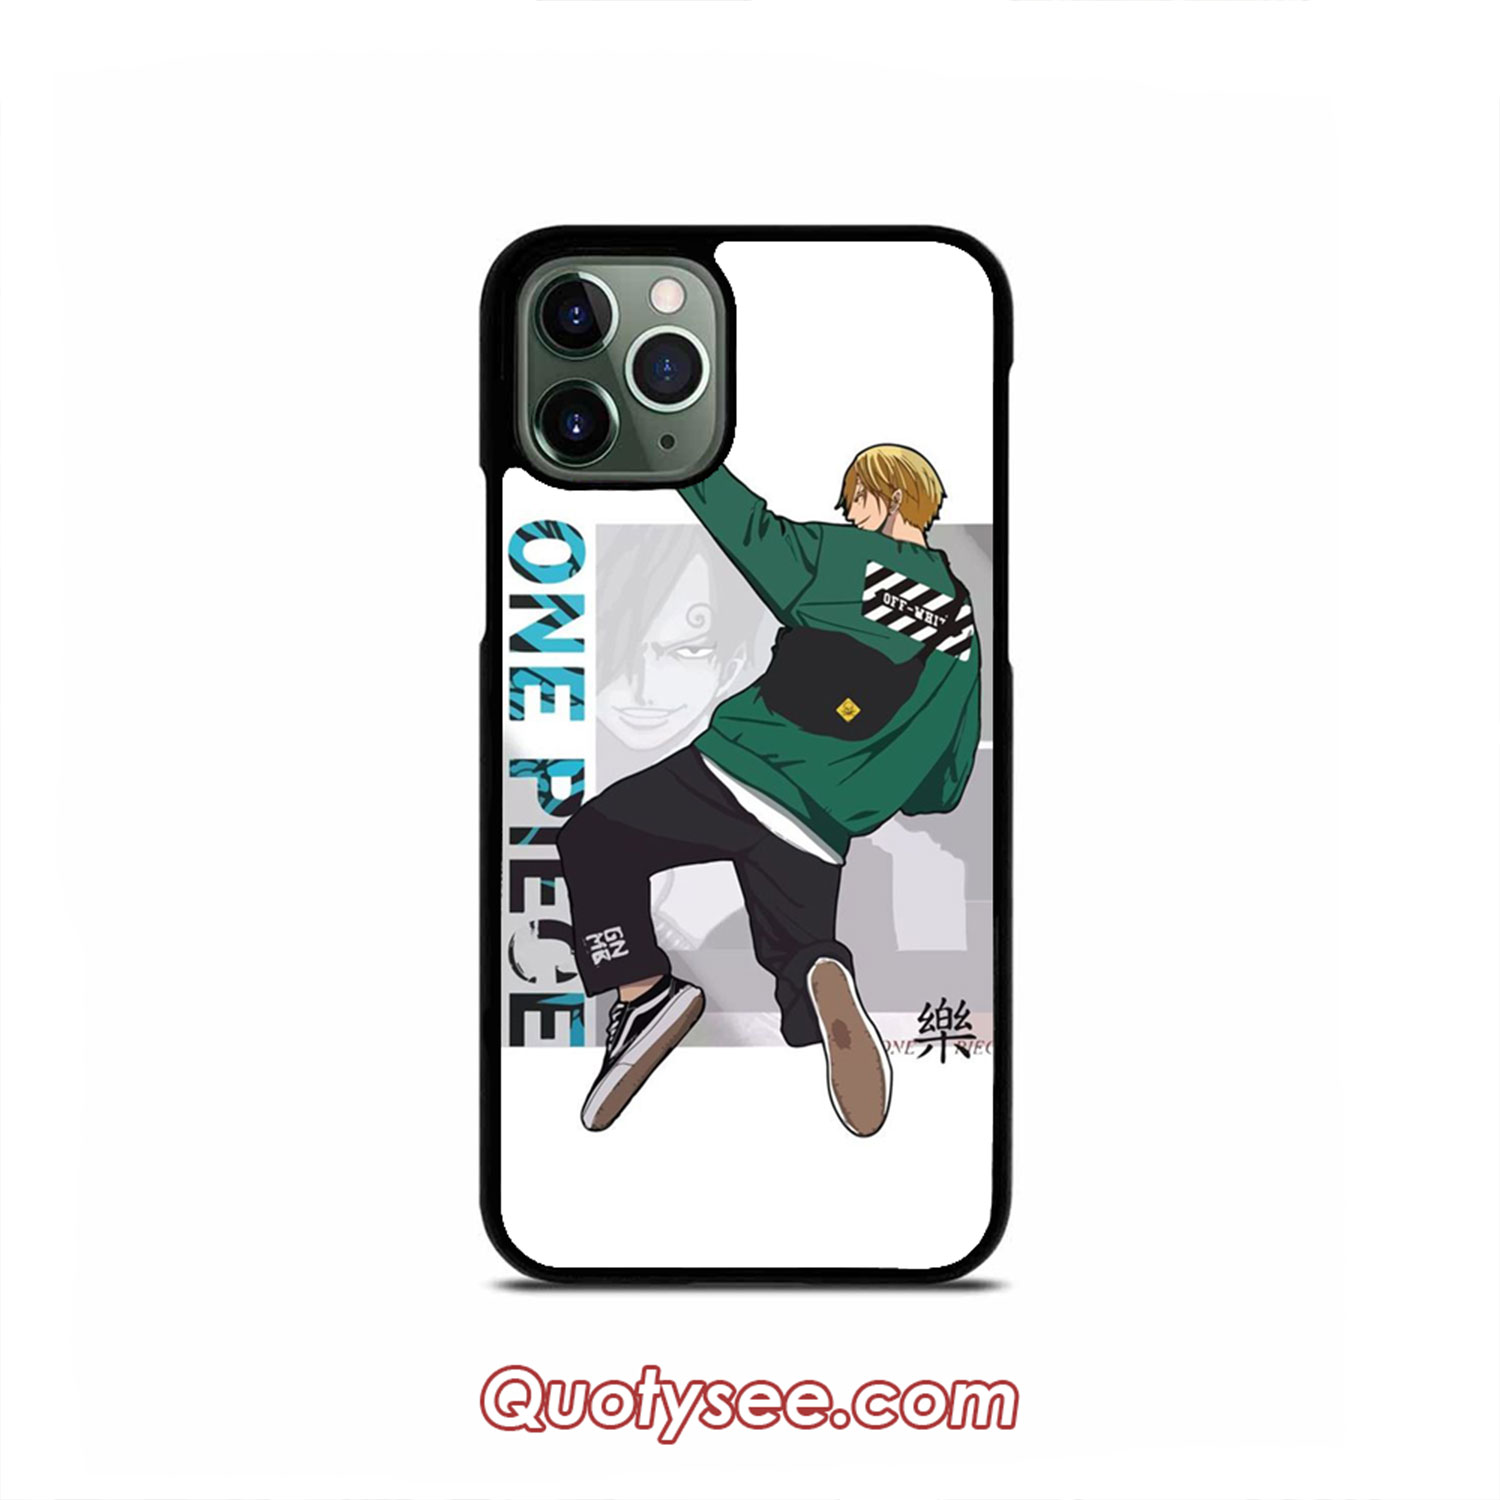 Sanji Off White One Piece Iphone Case 11 11 Pro 11 Pro Max Xs Max Xr X 8 8 Plus 7 7 Plus 6 6s Quotysee Com